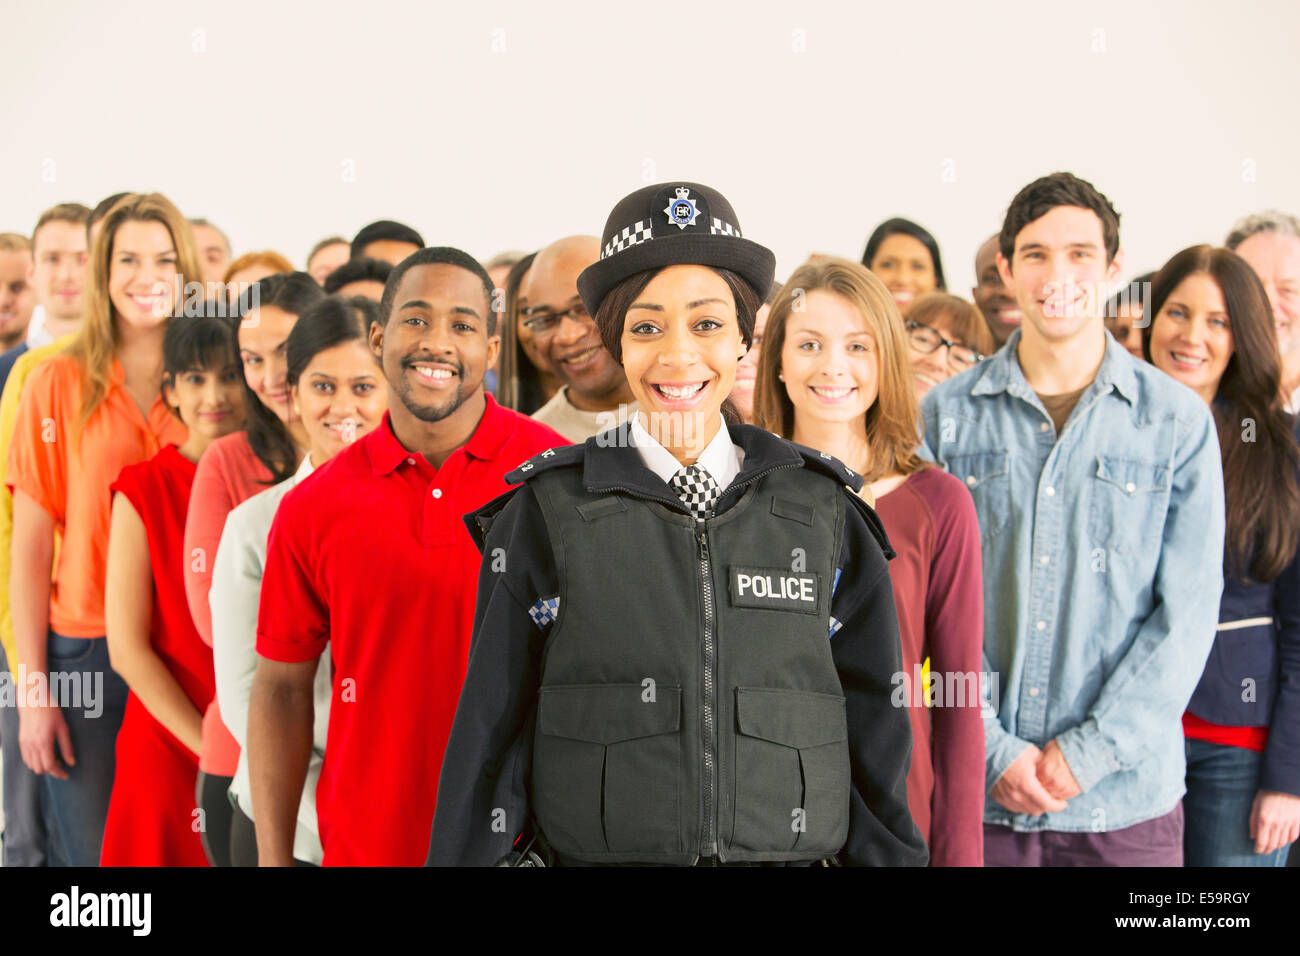 Portrait of smiling policewoman in front of large crowd Stock Photo